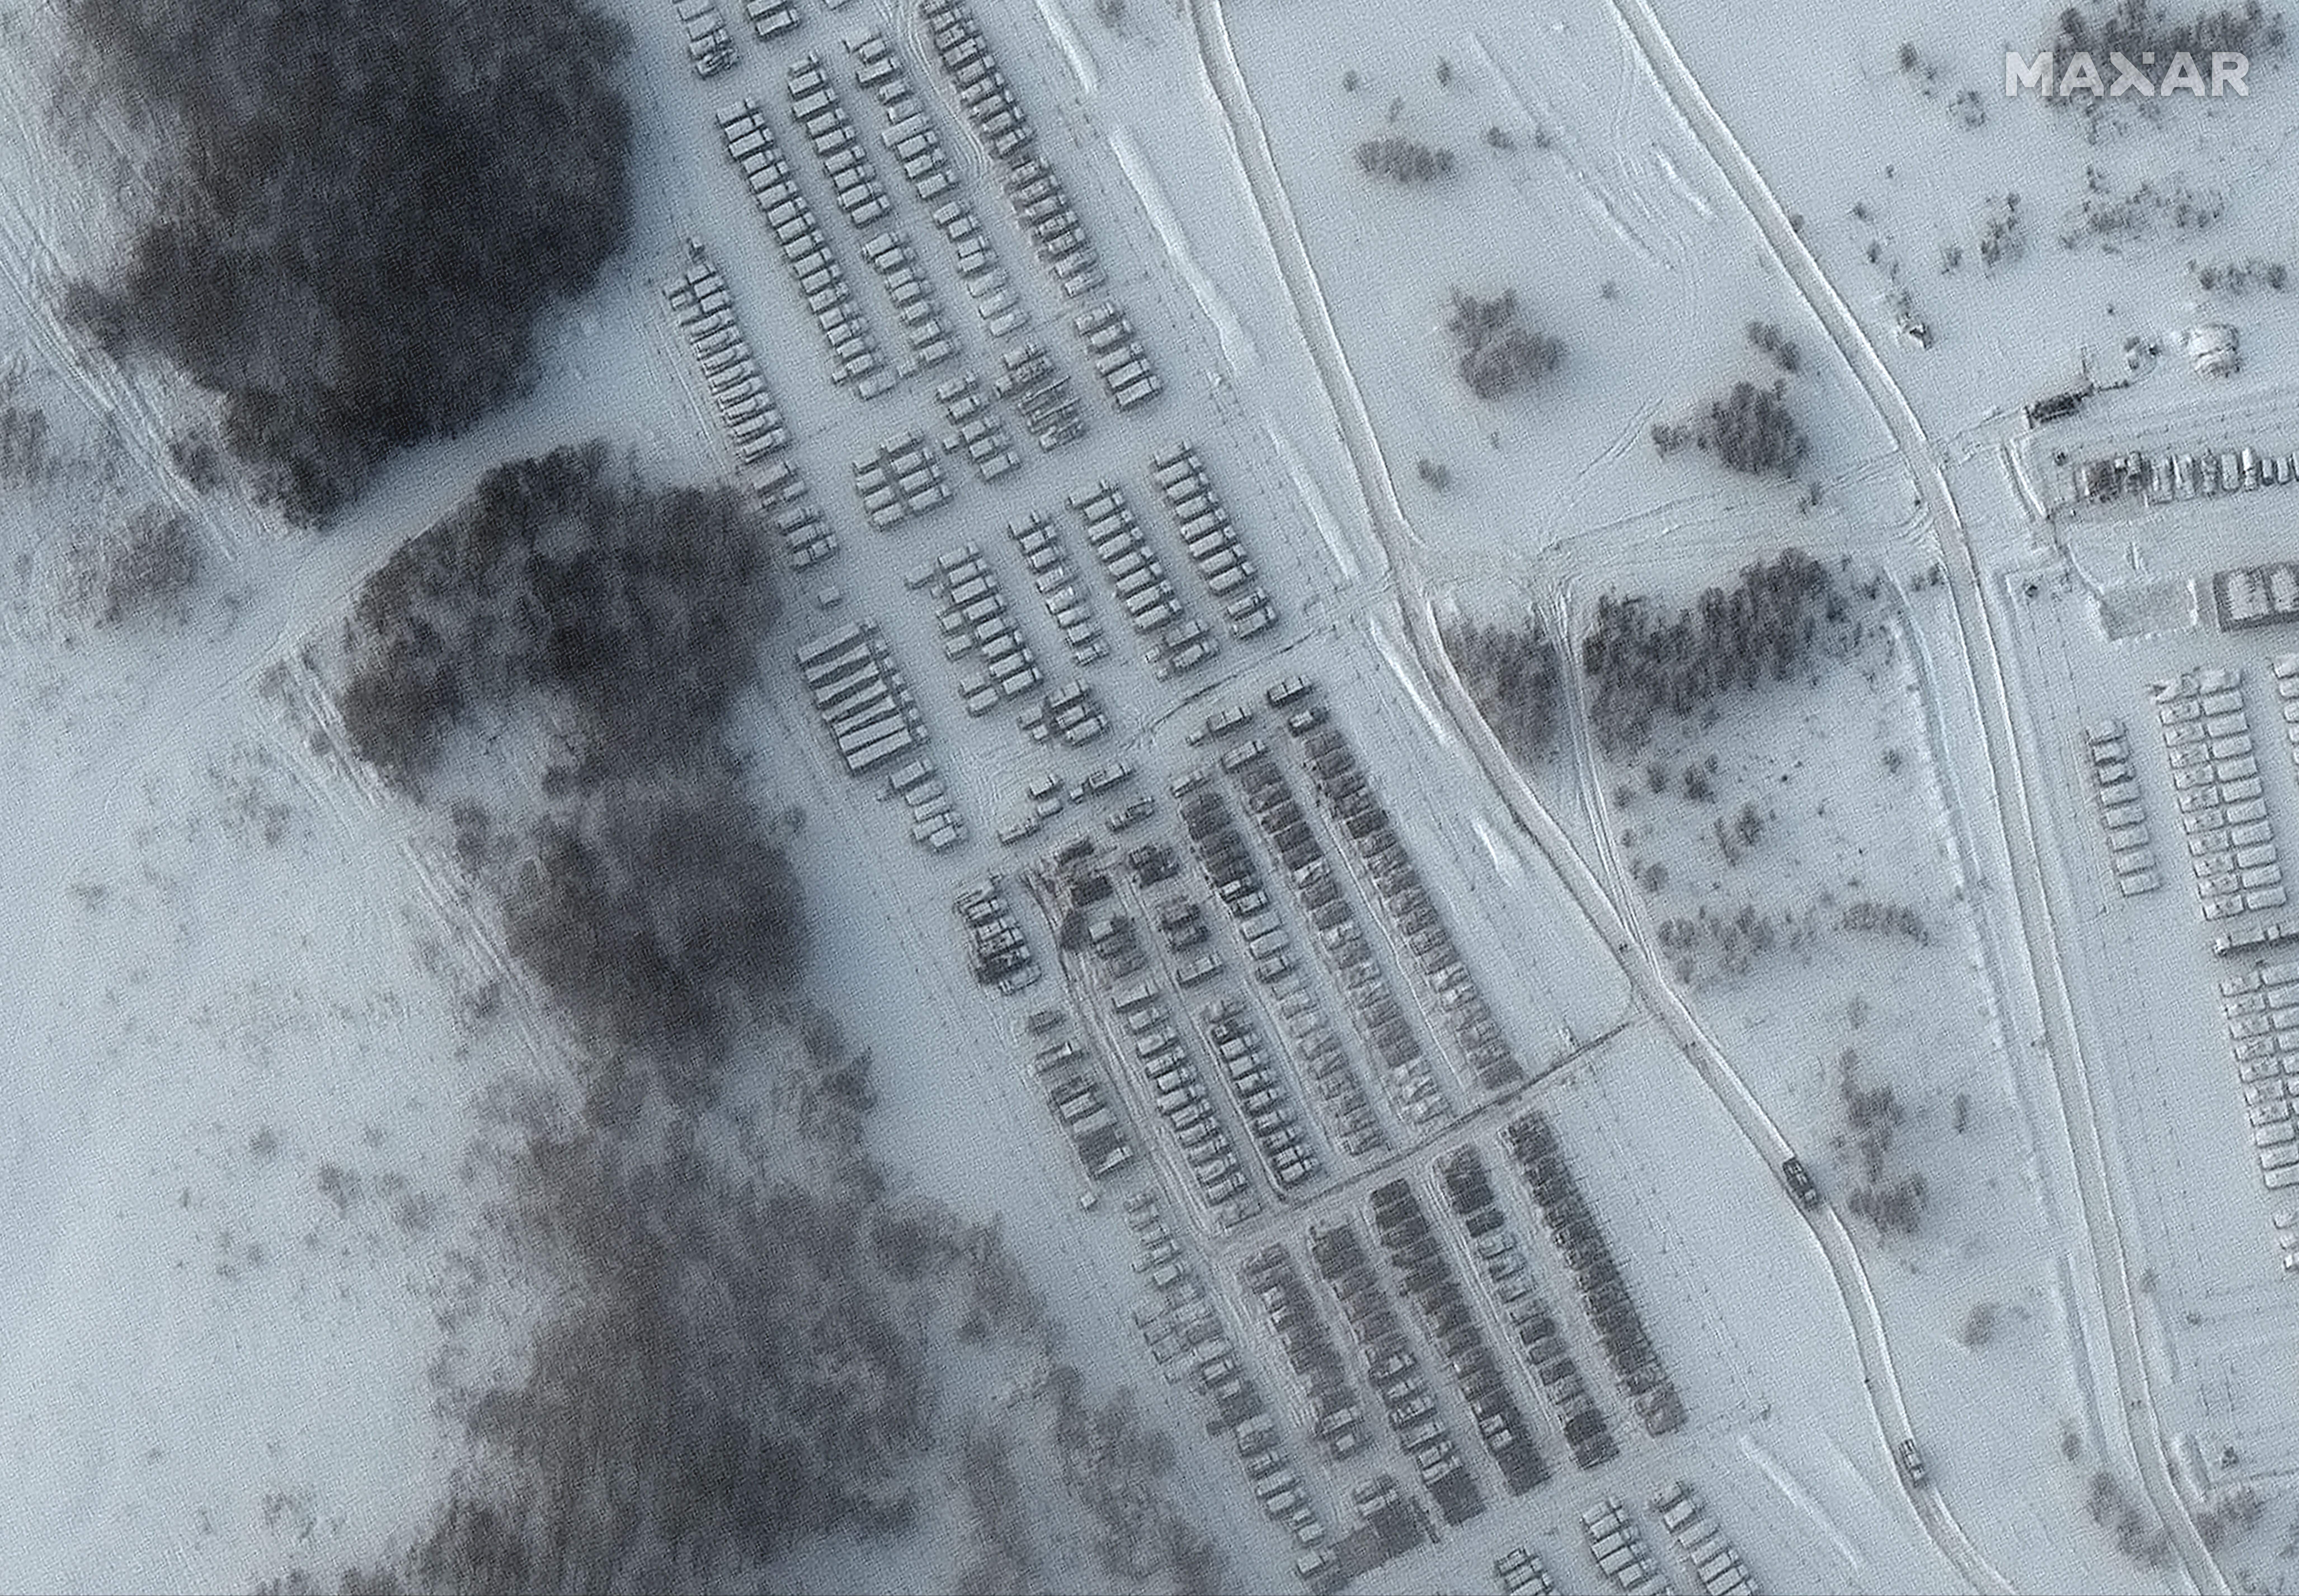 Tanks, artillery and other support equipment staged near Yelnya, Russia.